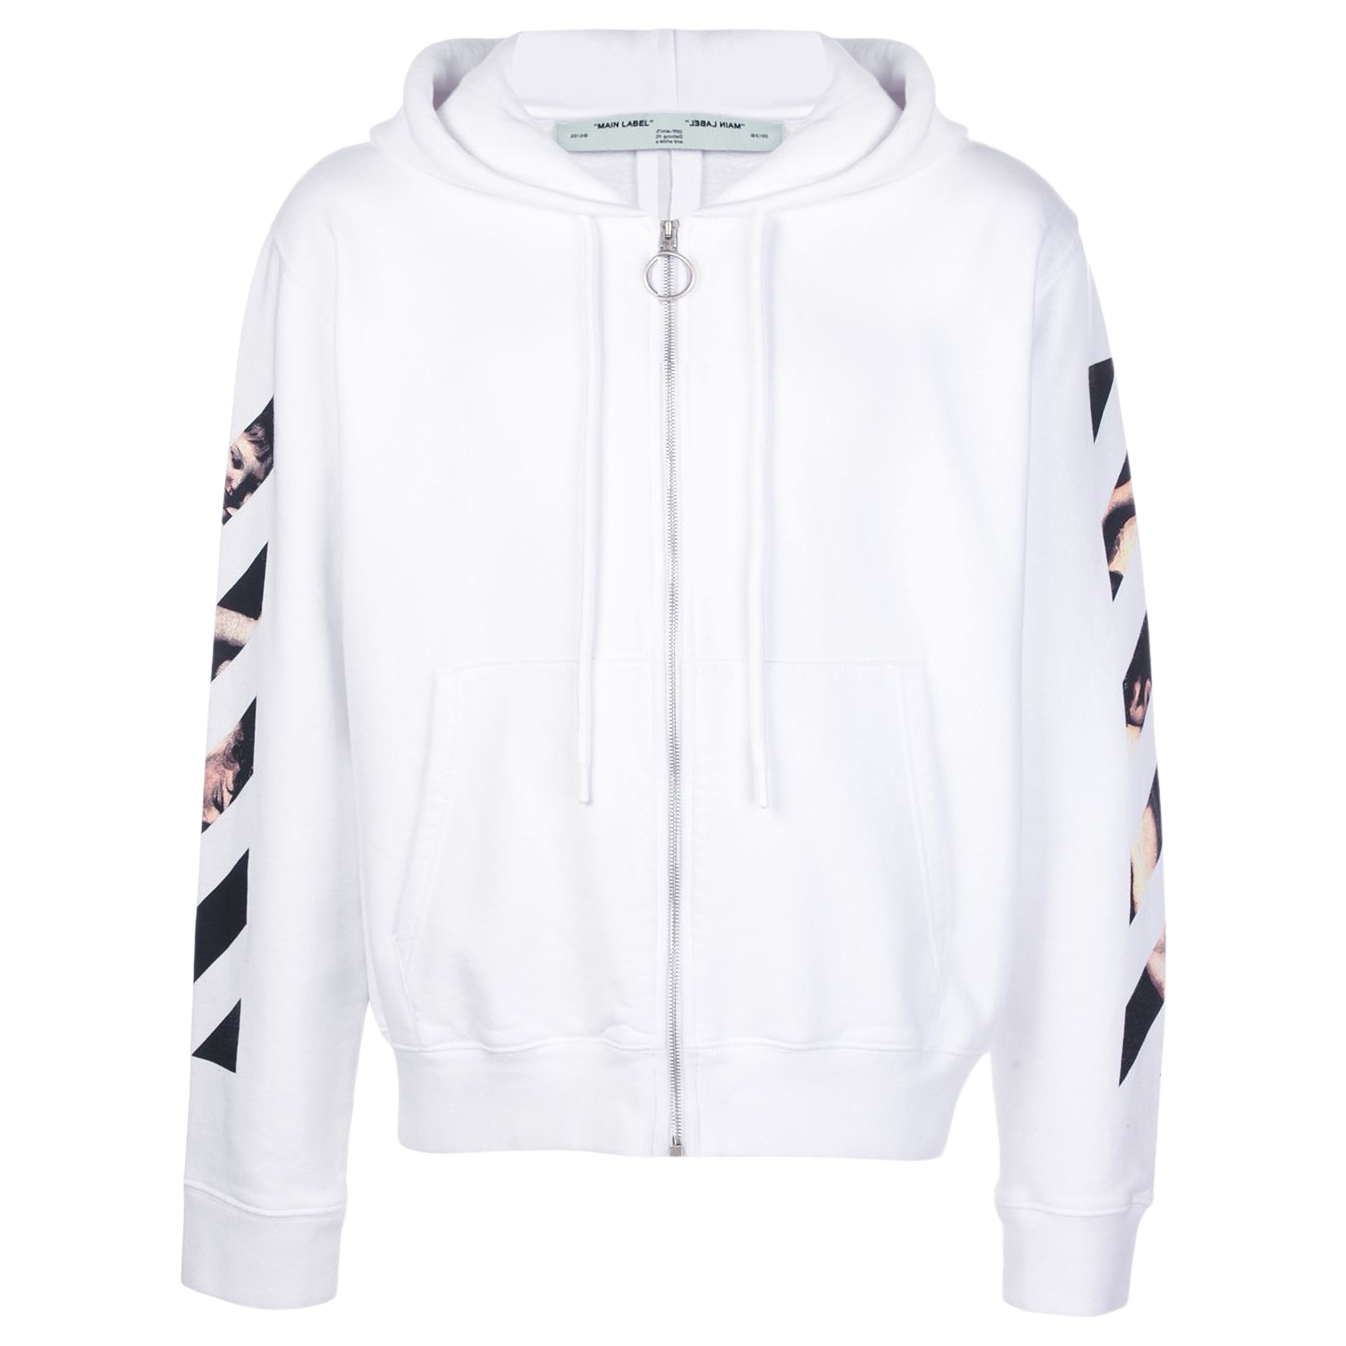 OFF-WHITE Caravaggio Arrows Zip Up Hoodie White